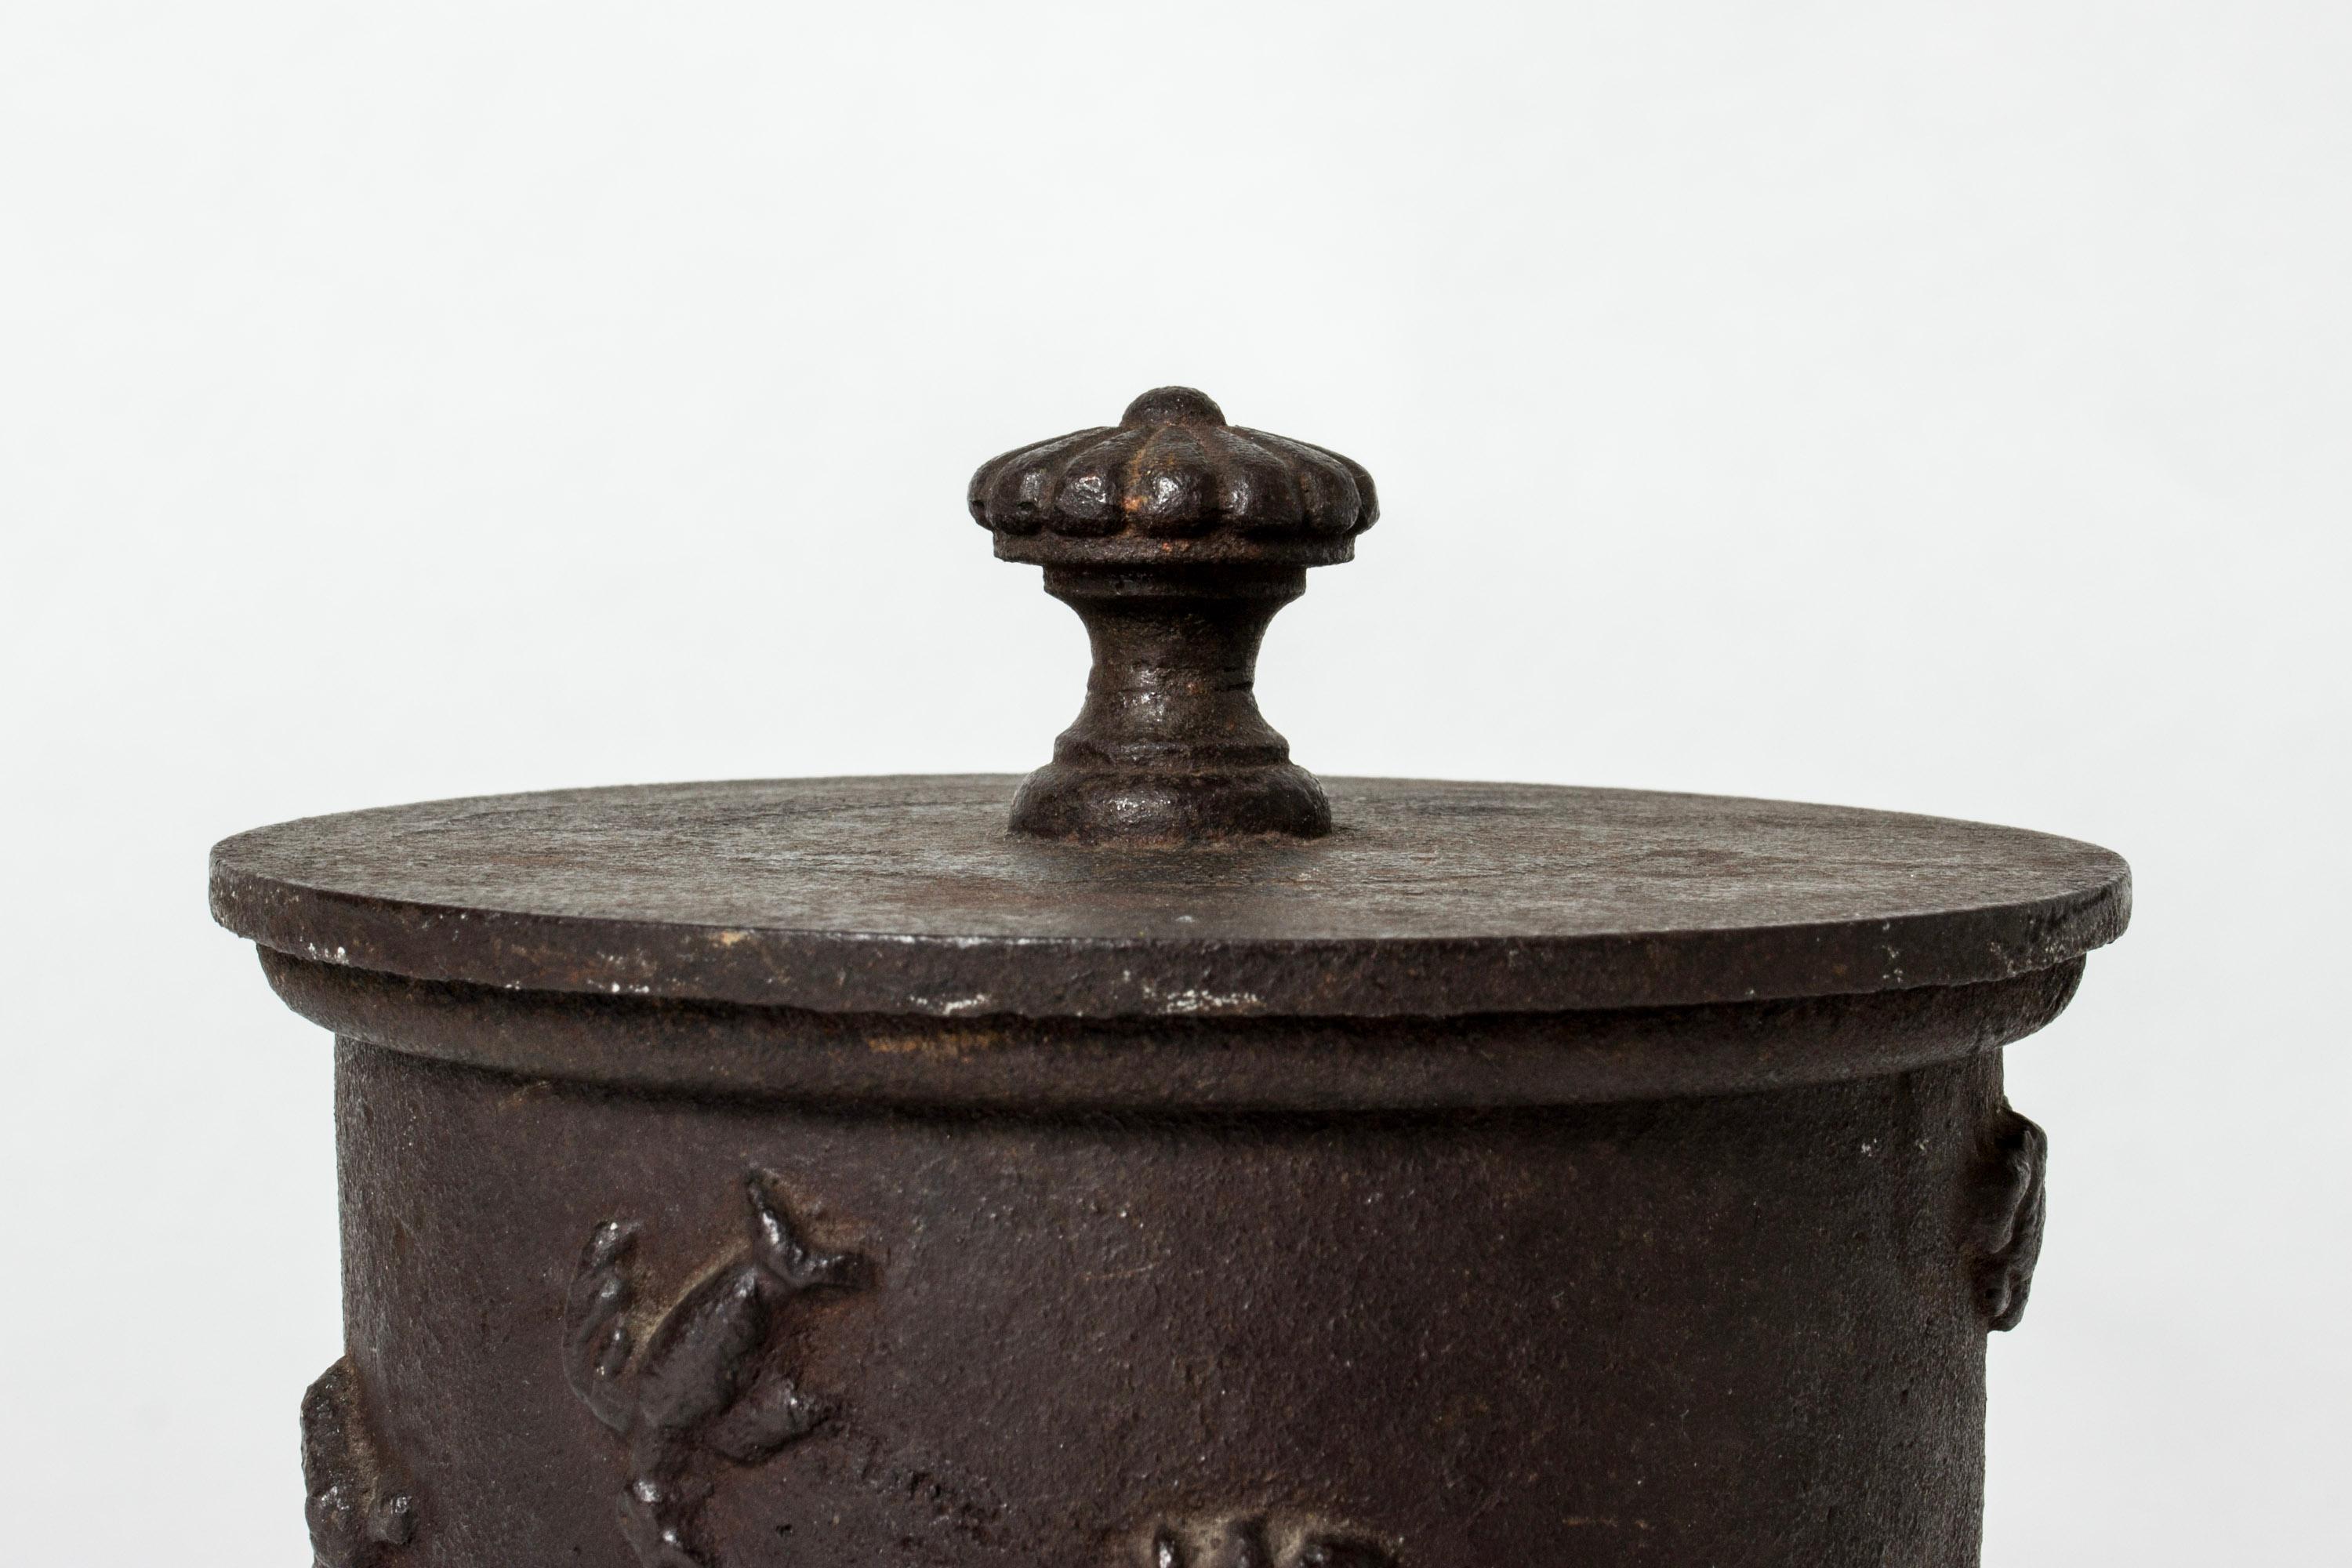 Elegant tobacco jar by Carl Elmberg, made in cast iron. Heavy quality. Relief decor of a running woman, a hunter and a deer.